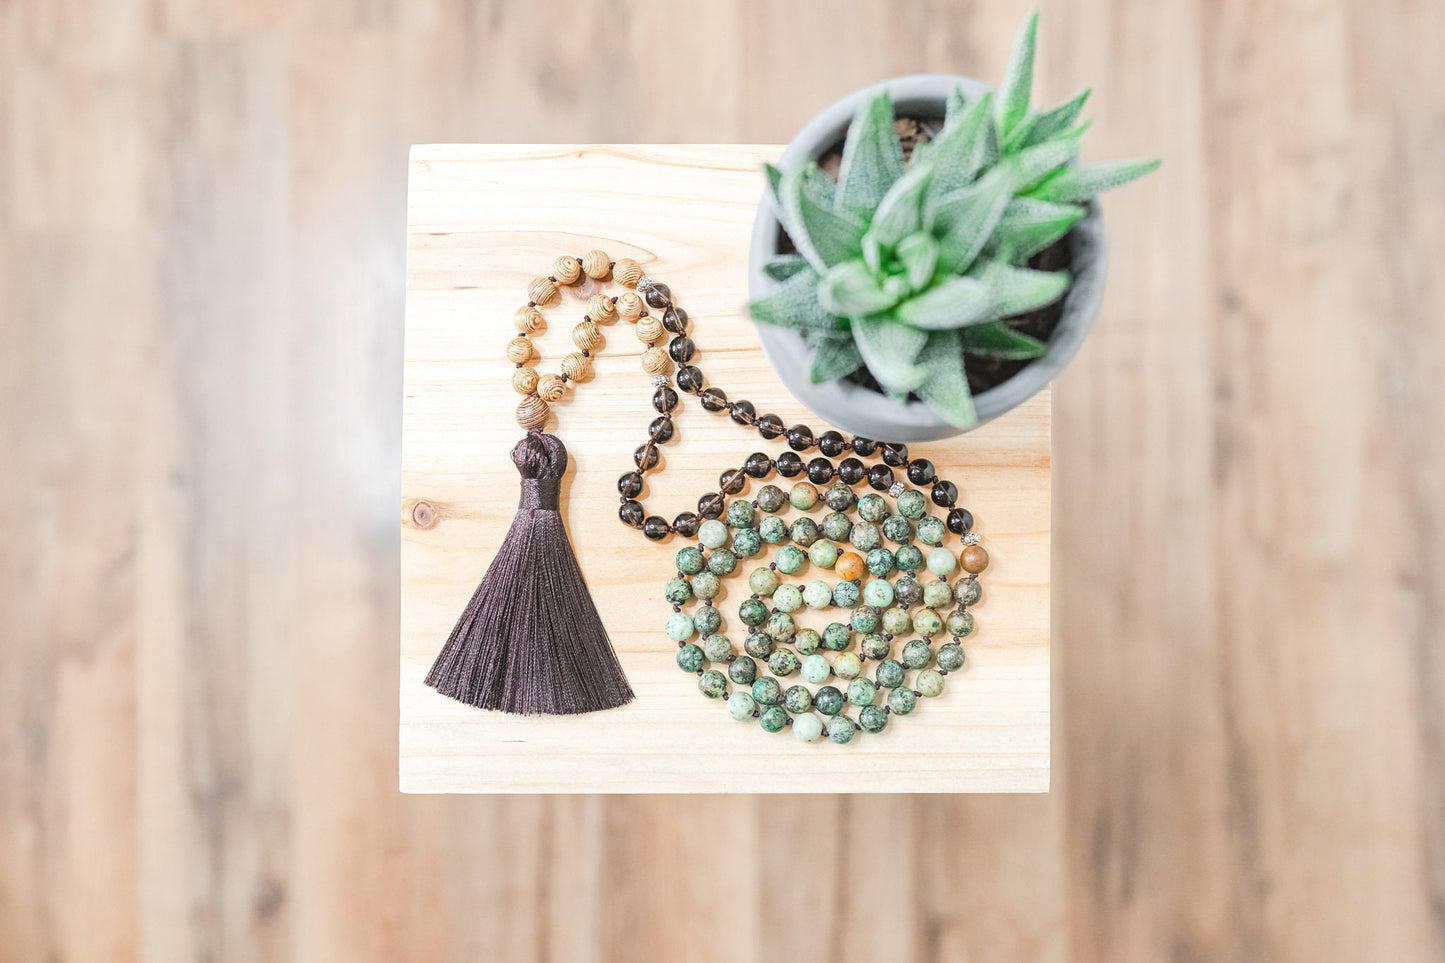 African Turquoise & Smoky Quartz 108 Bead Zen Mala Knotted Necklace